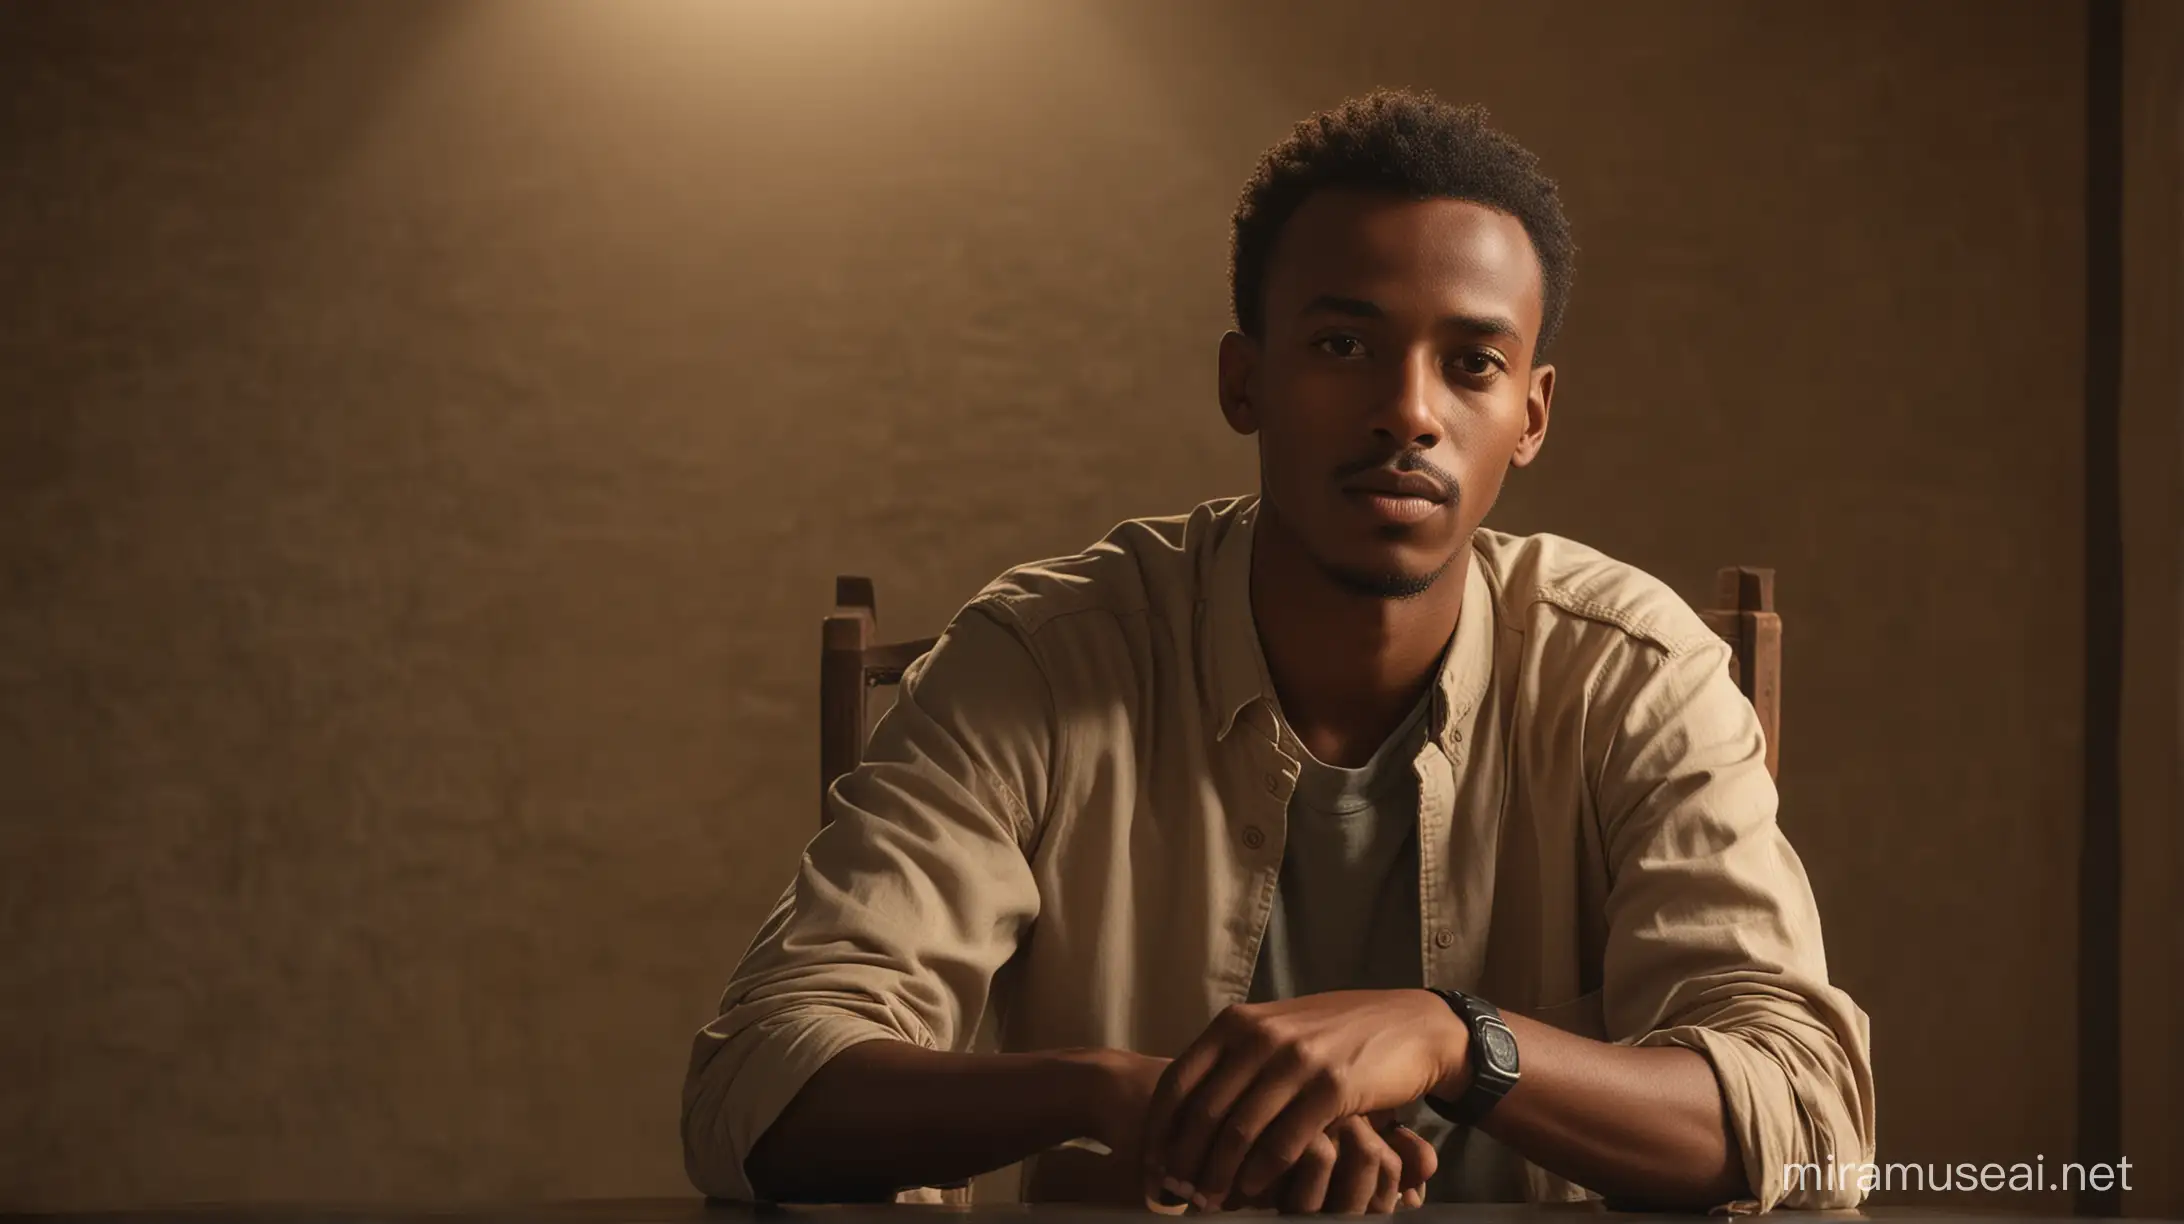 Cinematic Portrait of Ethiopian Journalist in Thoughtful Pose